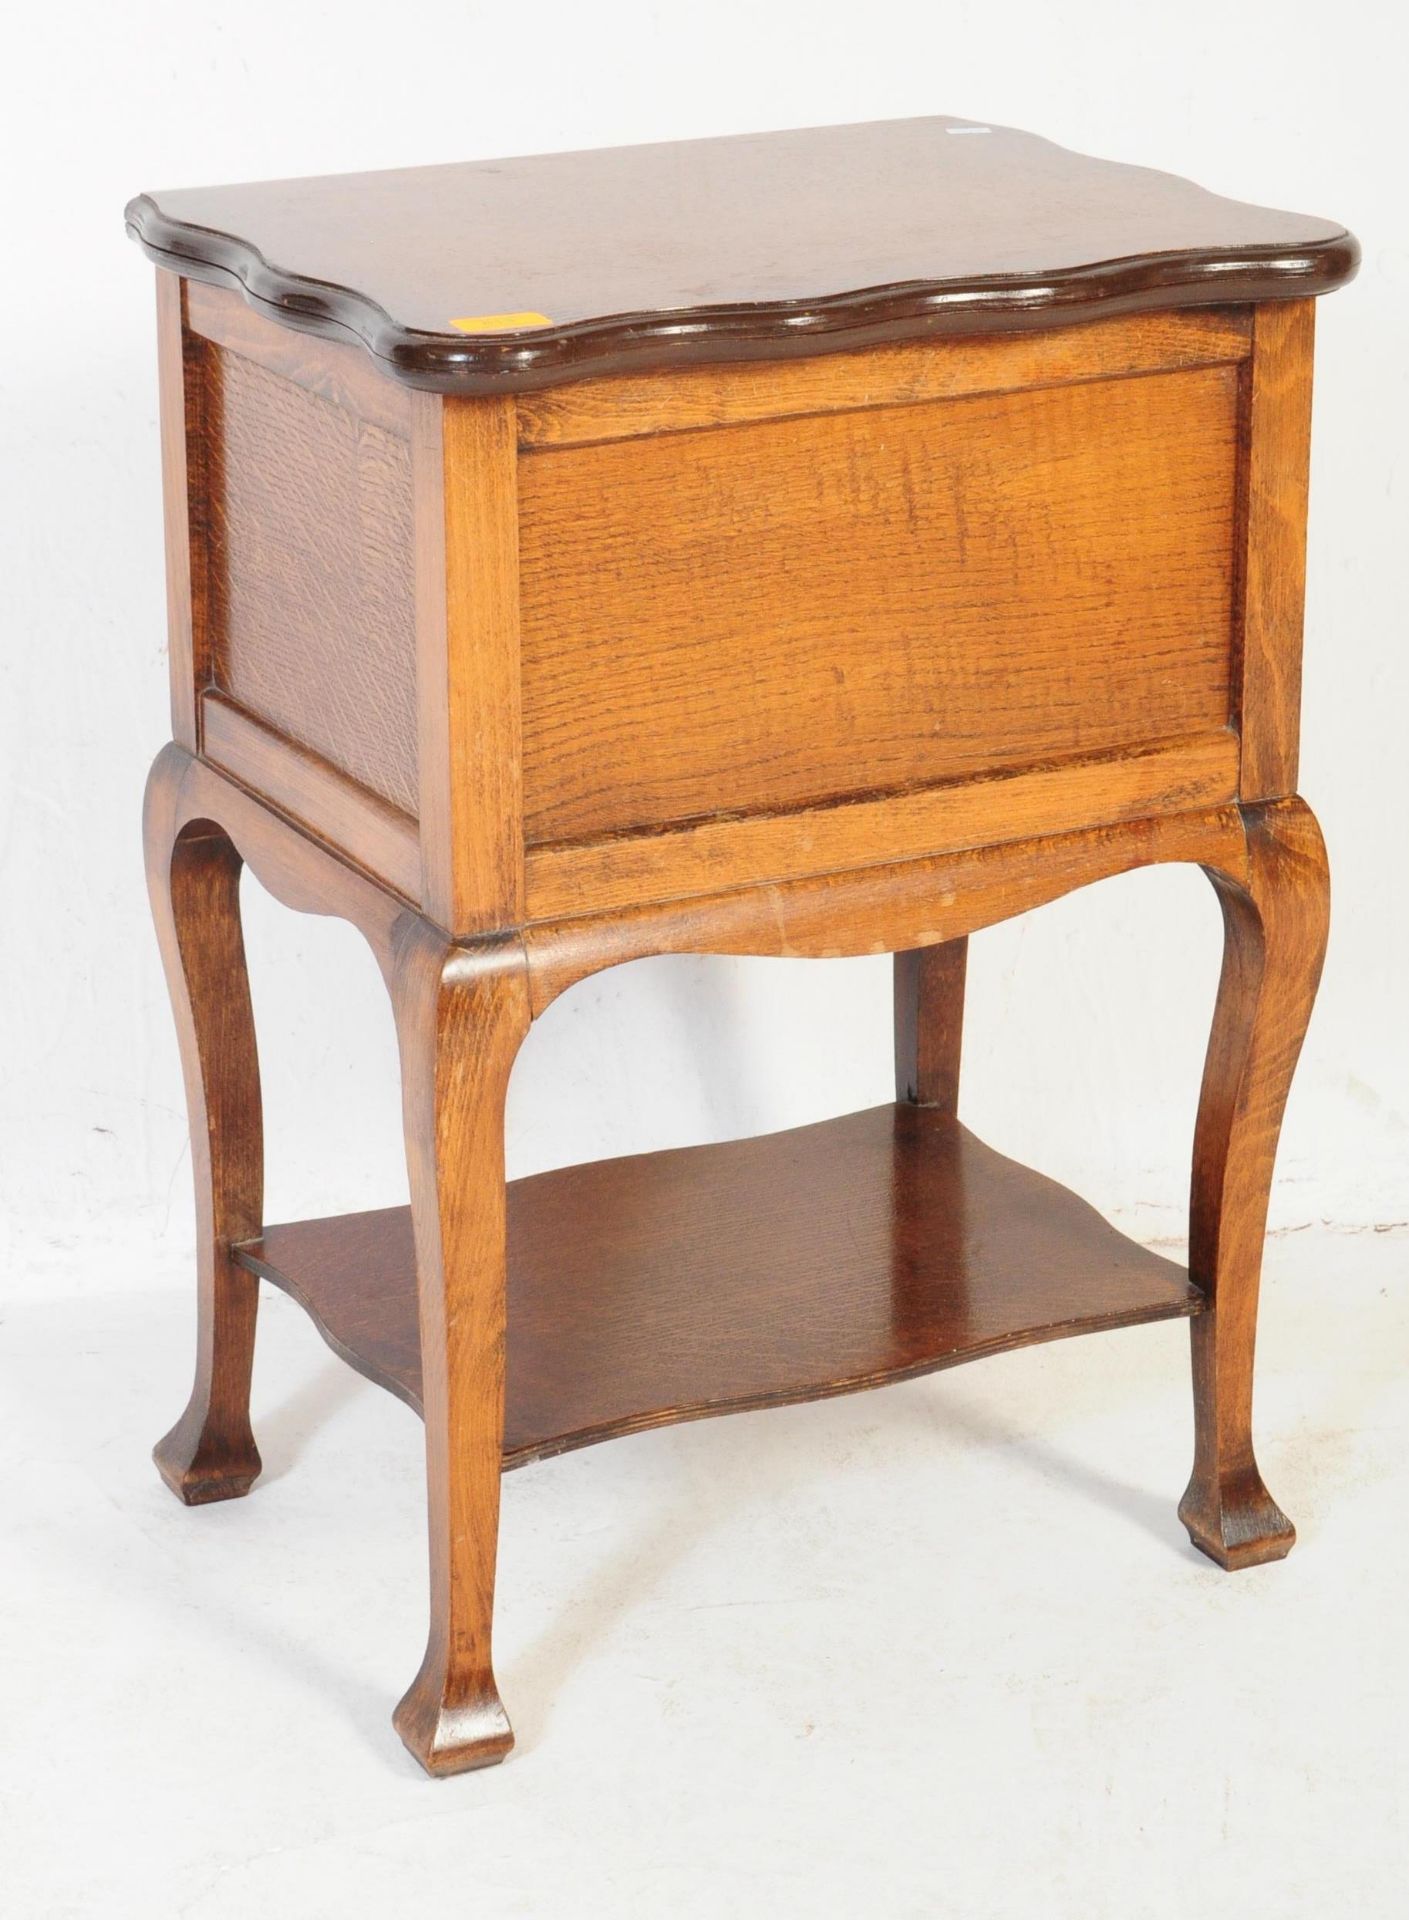 AN ART DECO 1930'S MORCO PRODUCT OAK SEWING BOX / CARD TABLE - Image 2 of 4